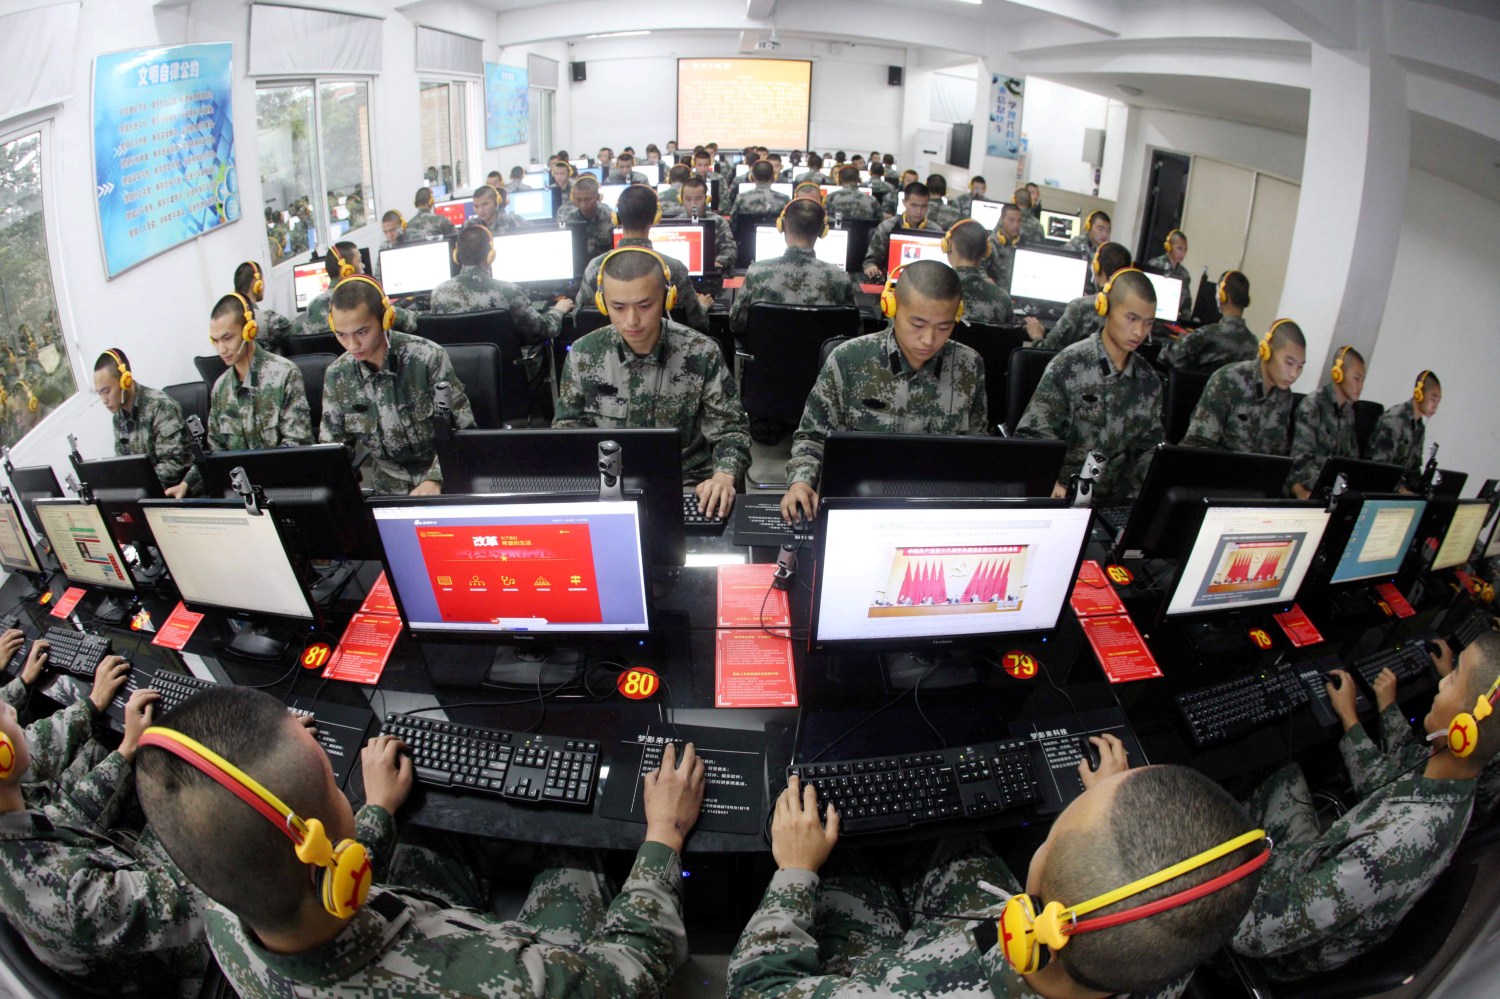 --FILE--Chinese soldiers browse online news on desktop computers at a garrison of the PLA (People's Liberation Army) in Chongqing, China, 14 November 2013.Chinese leaders have made the passage of a cybersecurity law a priority for this year, despite protests from the U.S. against the country's growing restrictions on technology firms. Zhang Dejiang, chairman of the standing committee of China's National People's Congress, said in a work report Sunday (8 March 2015) that formulating laws for cybersecurity, antiterrorism and national security were major tasks for 2015. The cybersecurity law, which official media had previously disclosed was in the works, is still being drafted. Details haven't been announced.No Use China. No Use France.